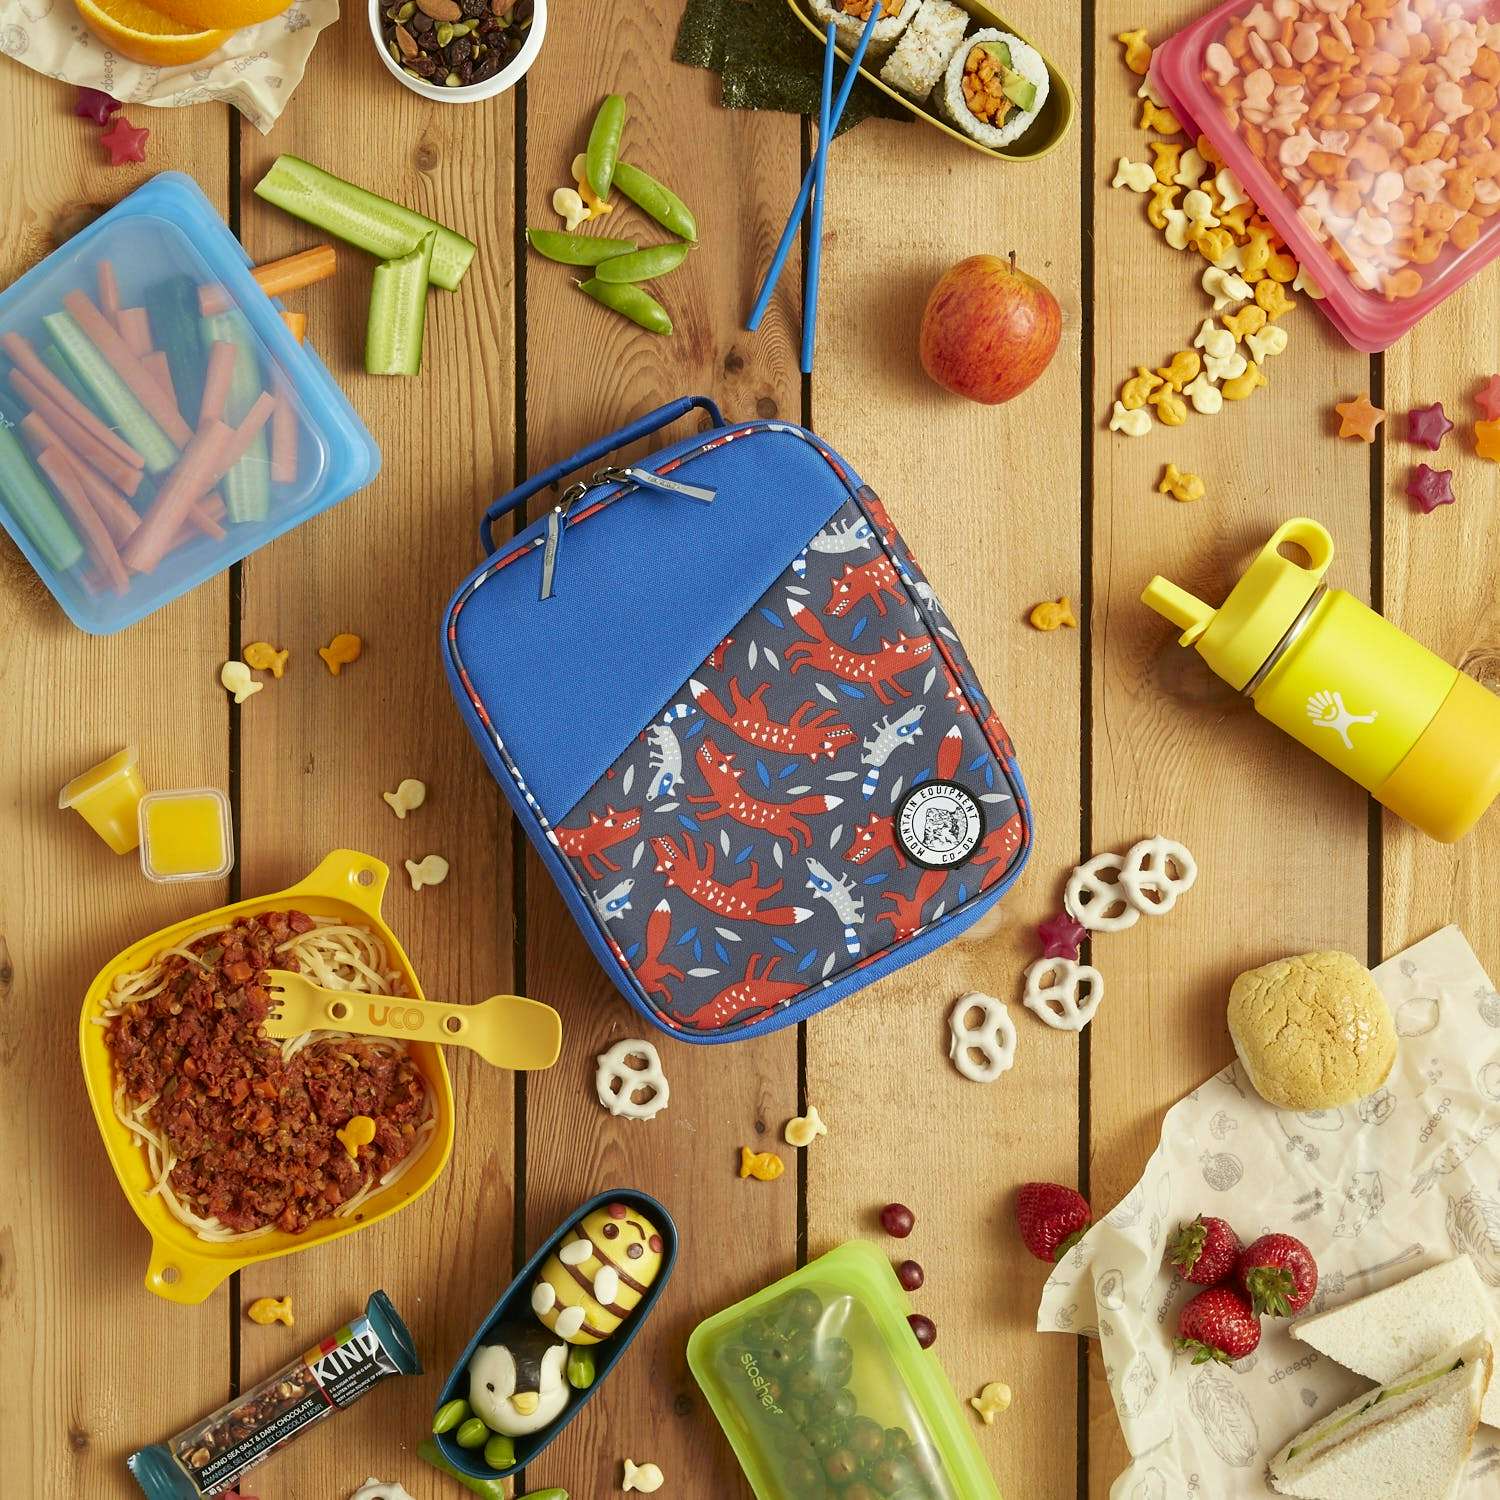 Kids lunch kit, surrounded by a random assortment of snacks